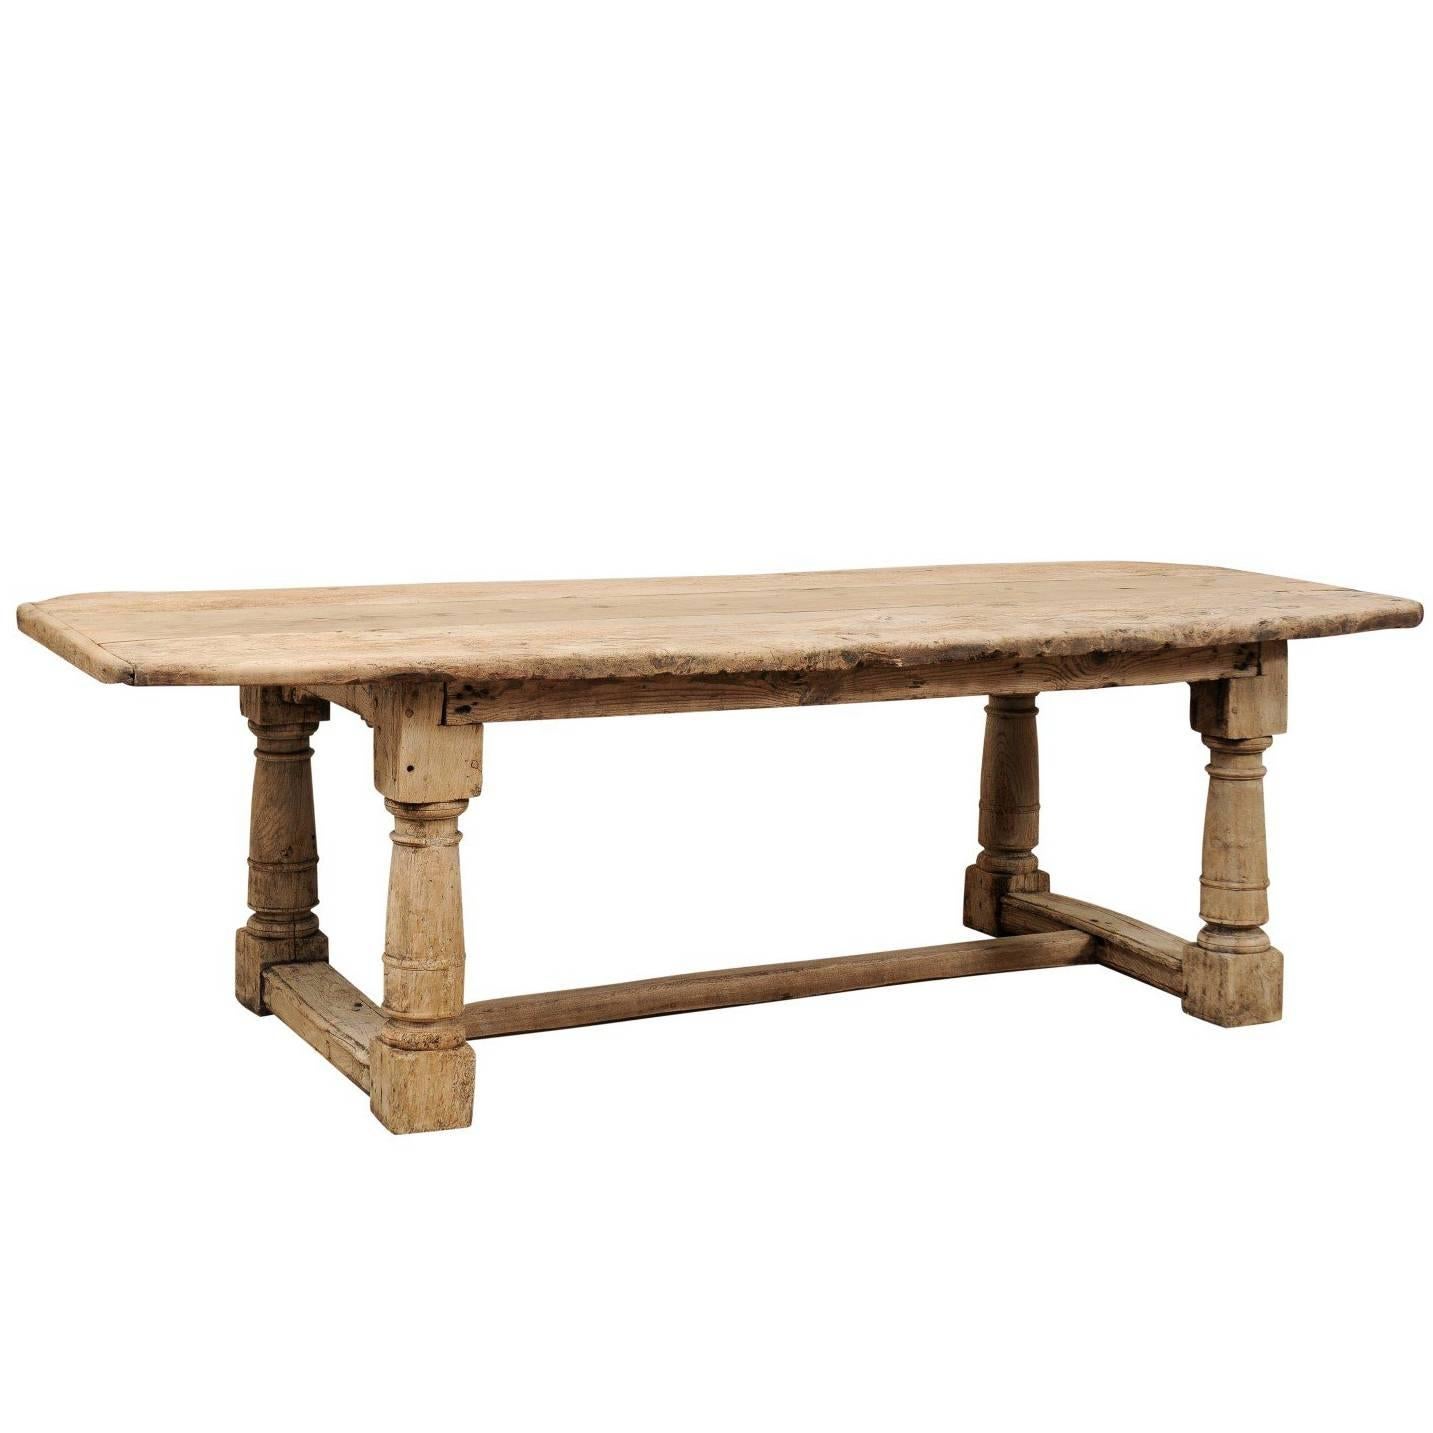 Italian Early 18th Century Bleached Oak Rustic Dining Table with Lovely Aging